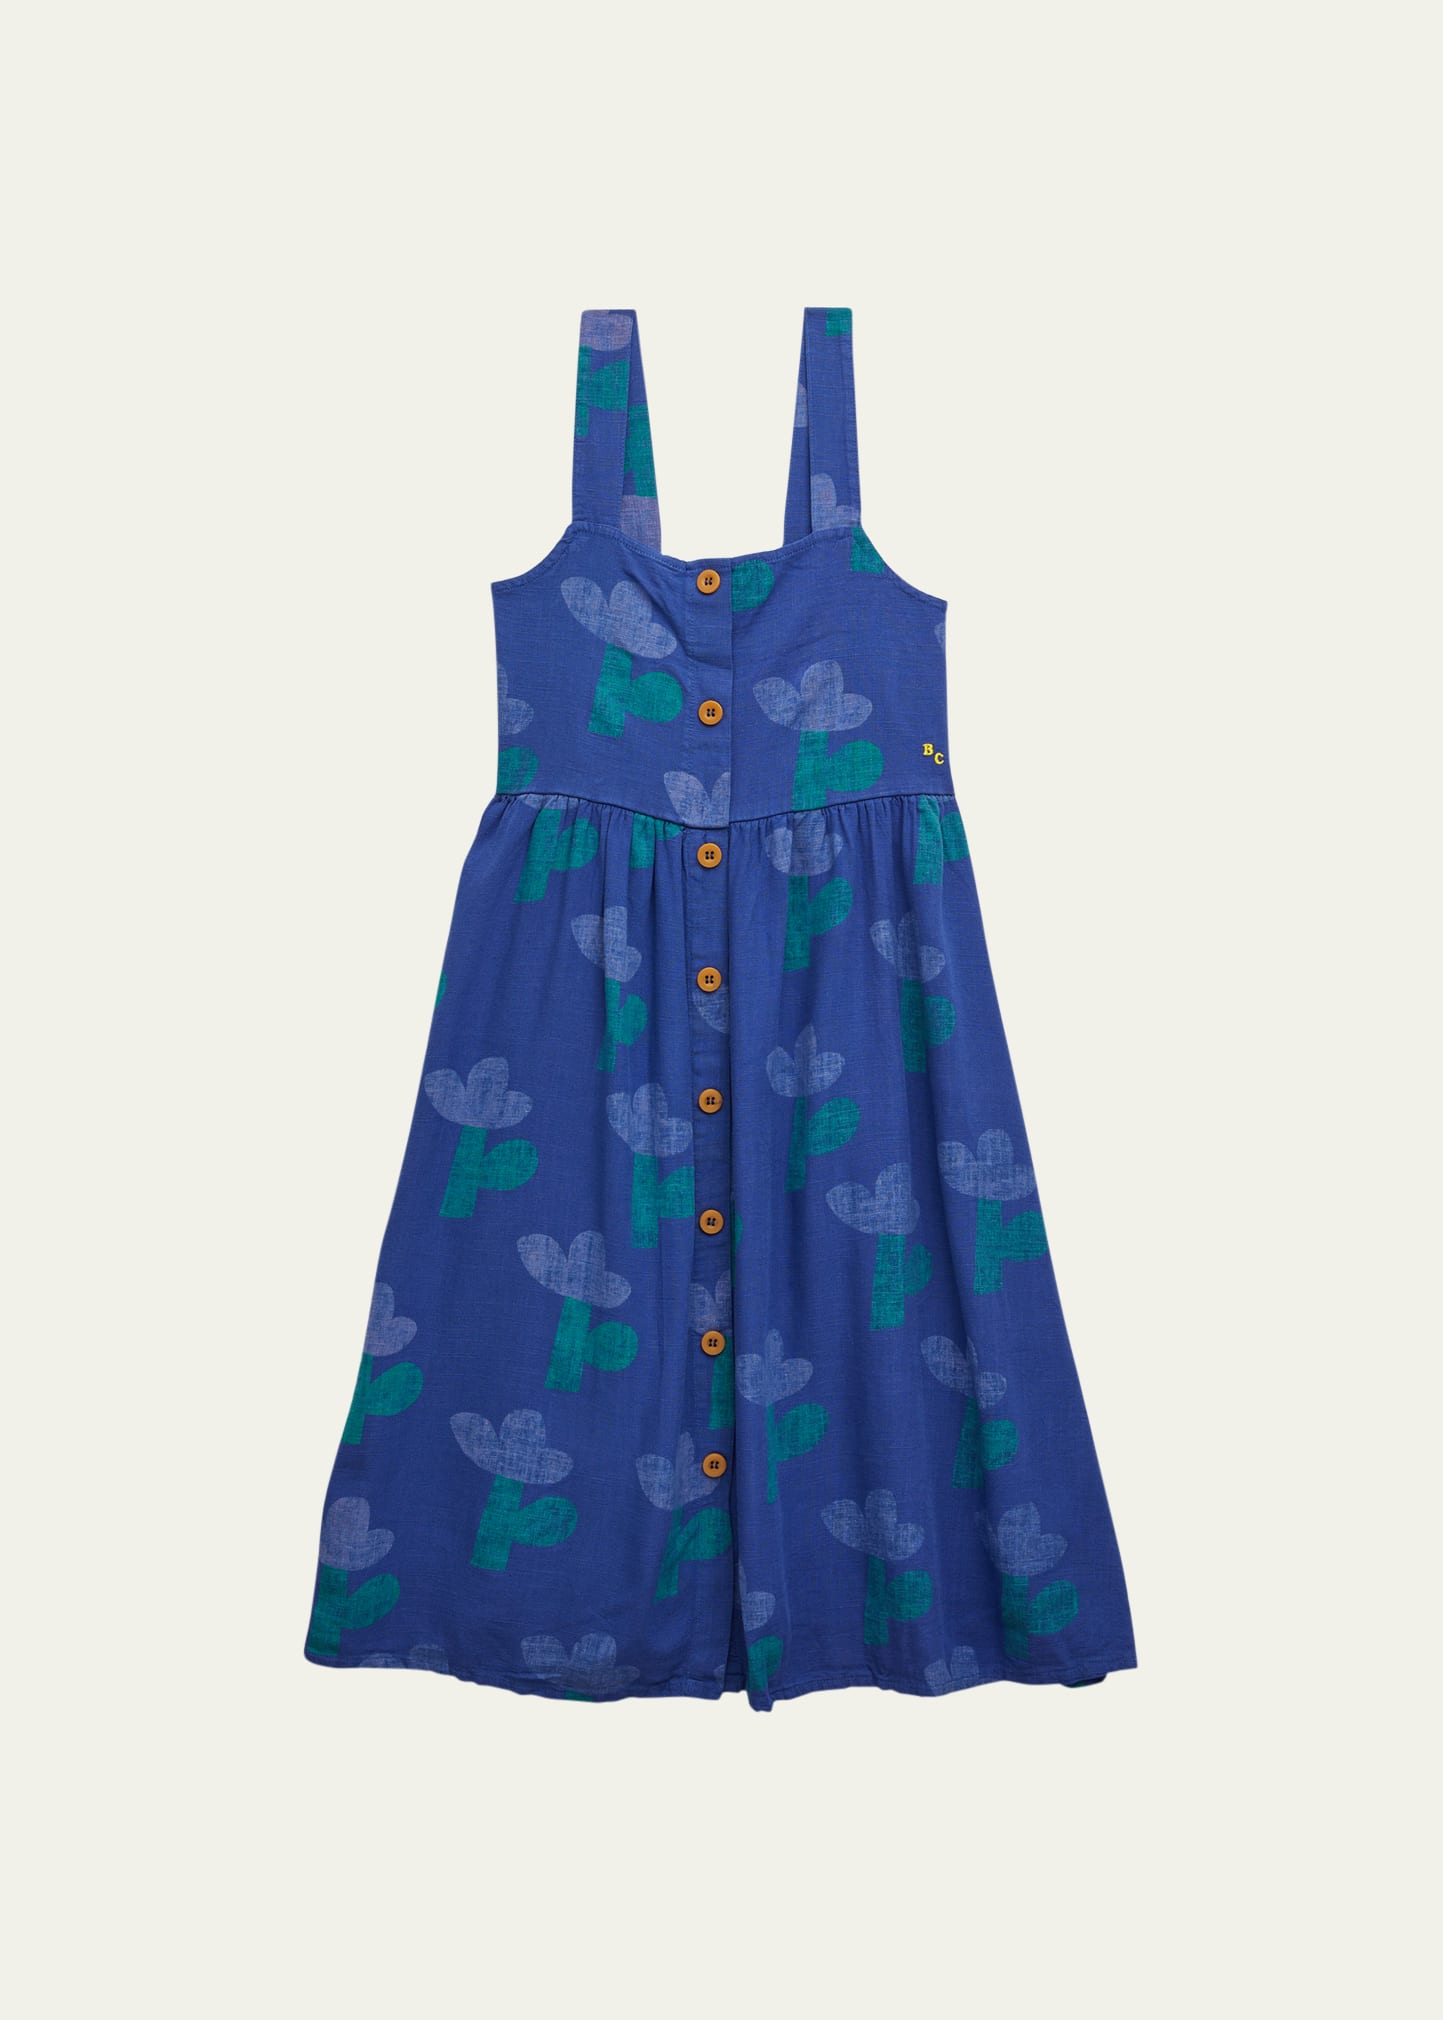 Bobo Choses Girl's Sea Flower Button-Front Dress, Size 2-13